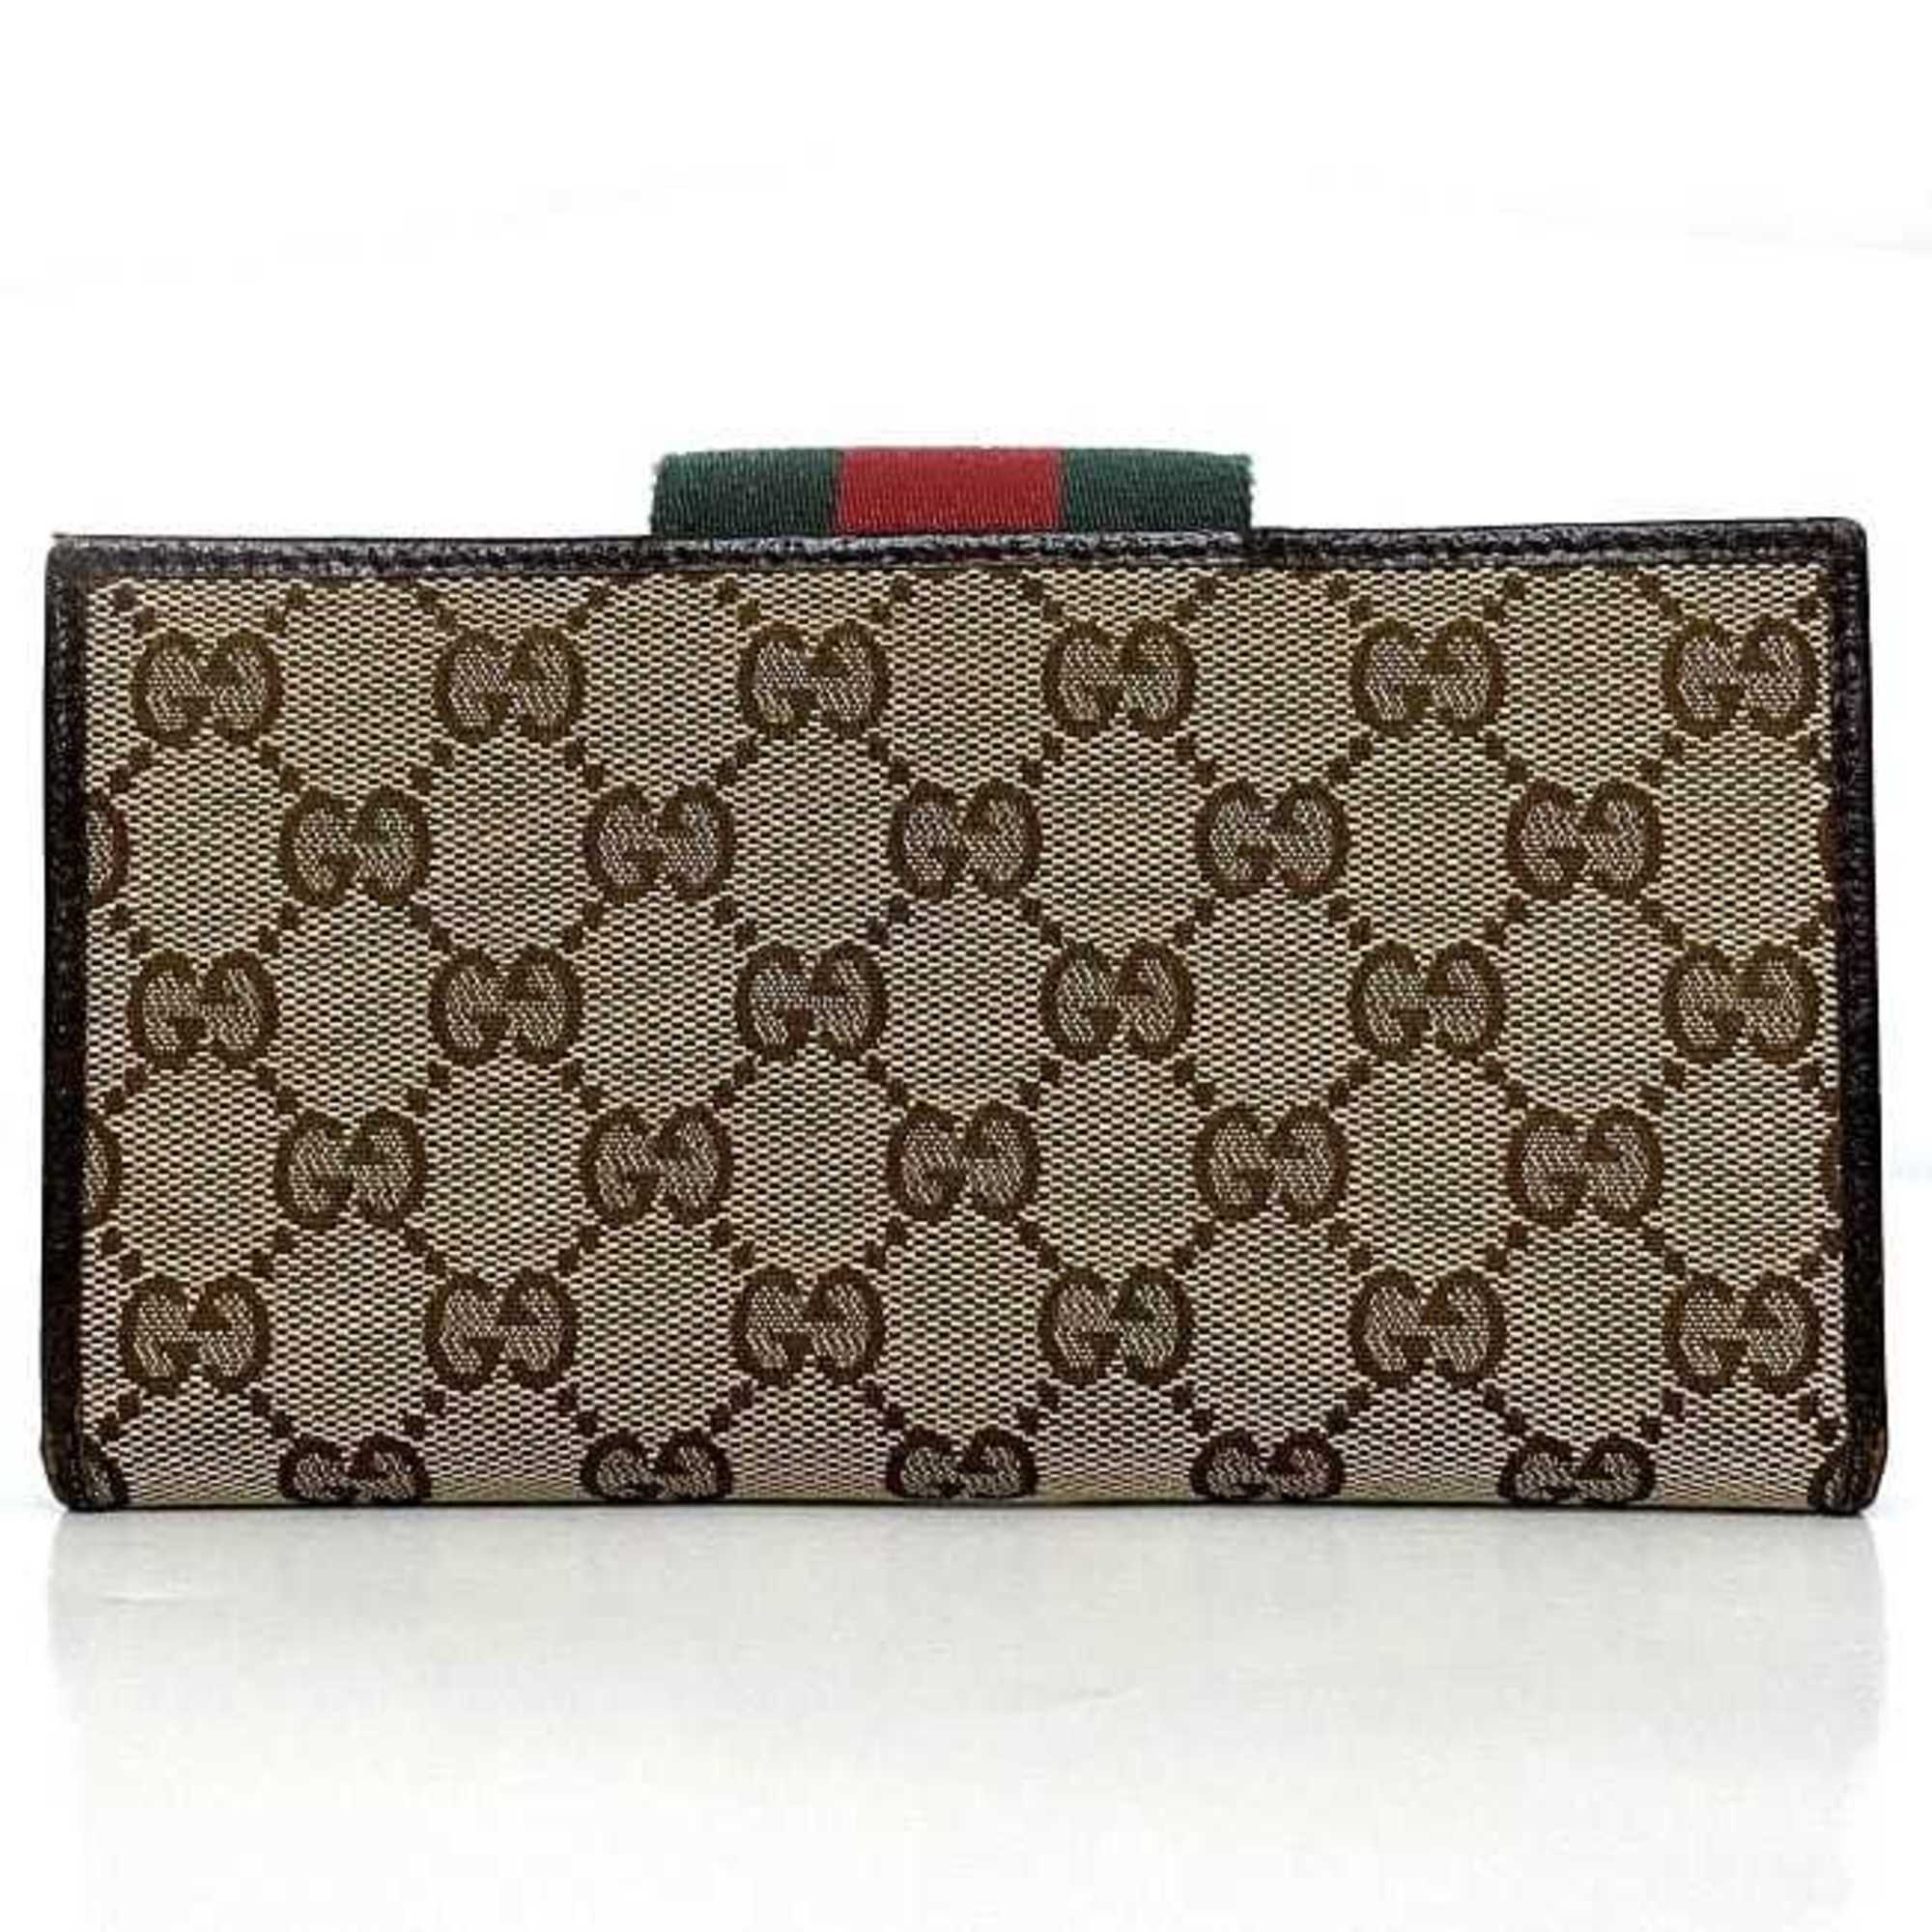 Gucci Bifold Long Wallet Beige Brown Webbing Line 181668 Folding Canvas Leather GUCCI Striped Border Women's Green Red